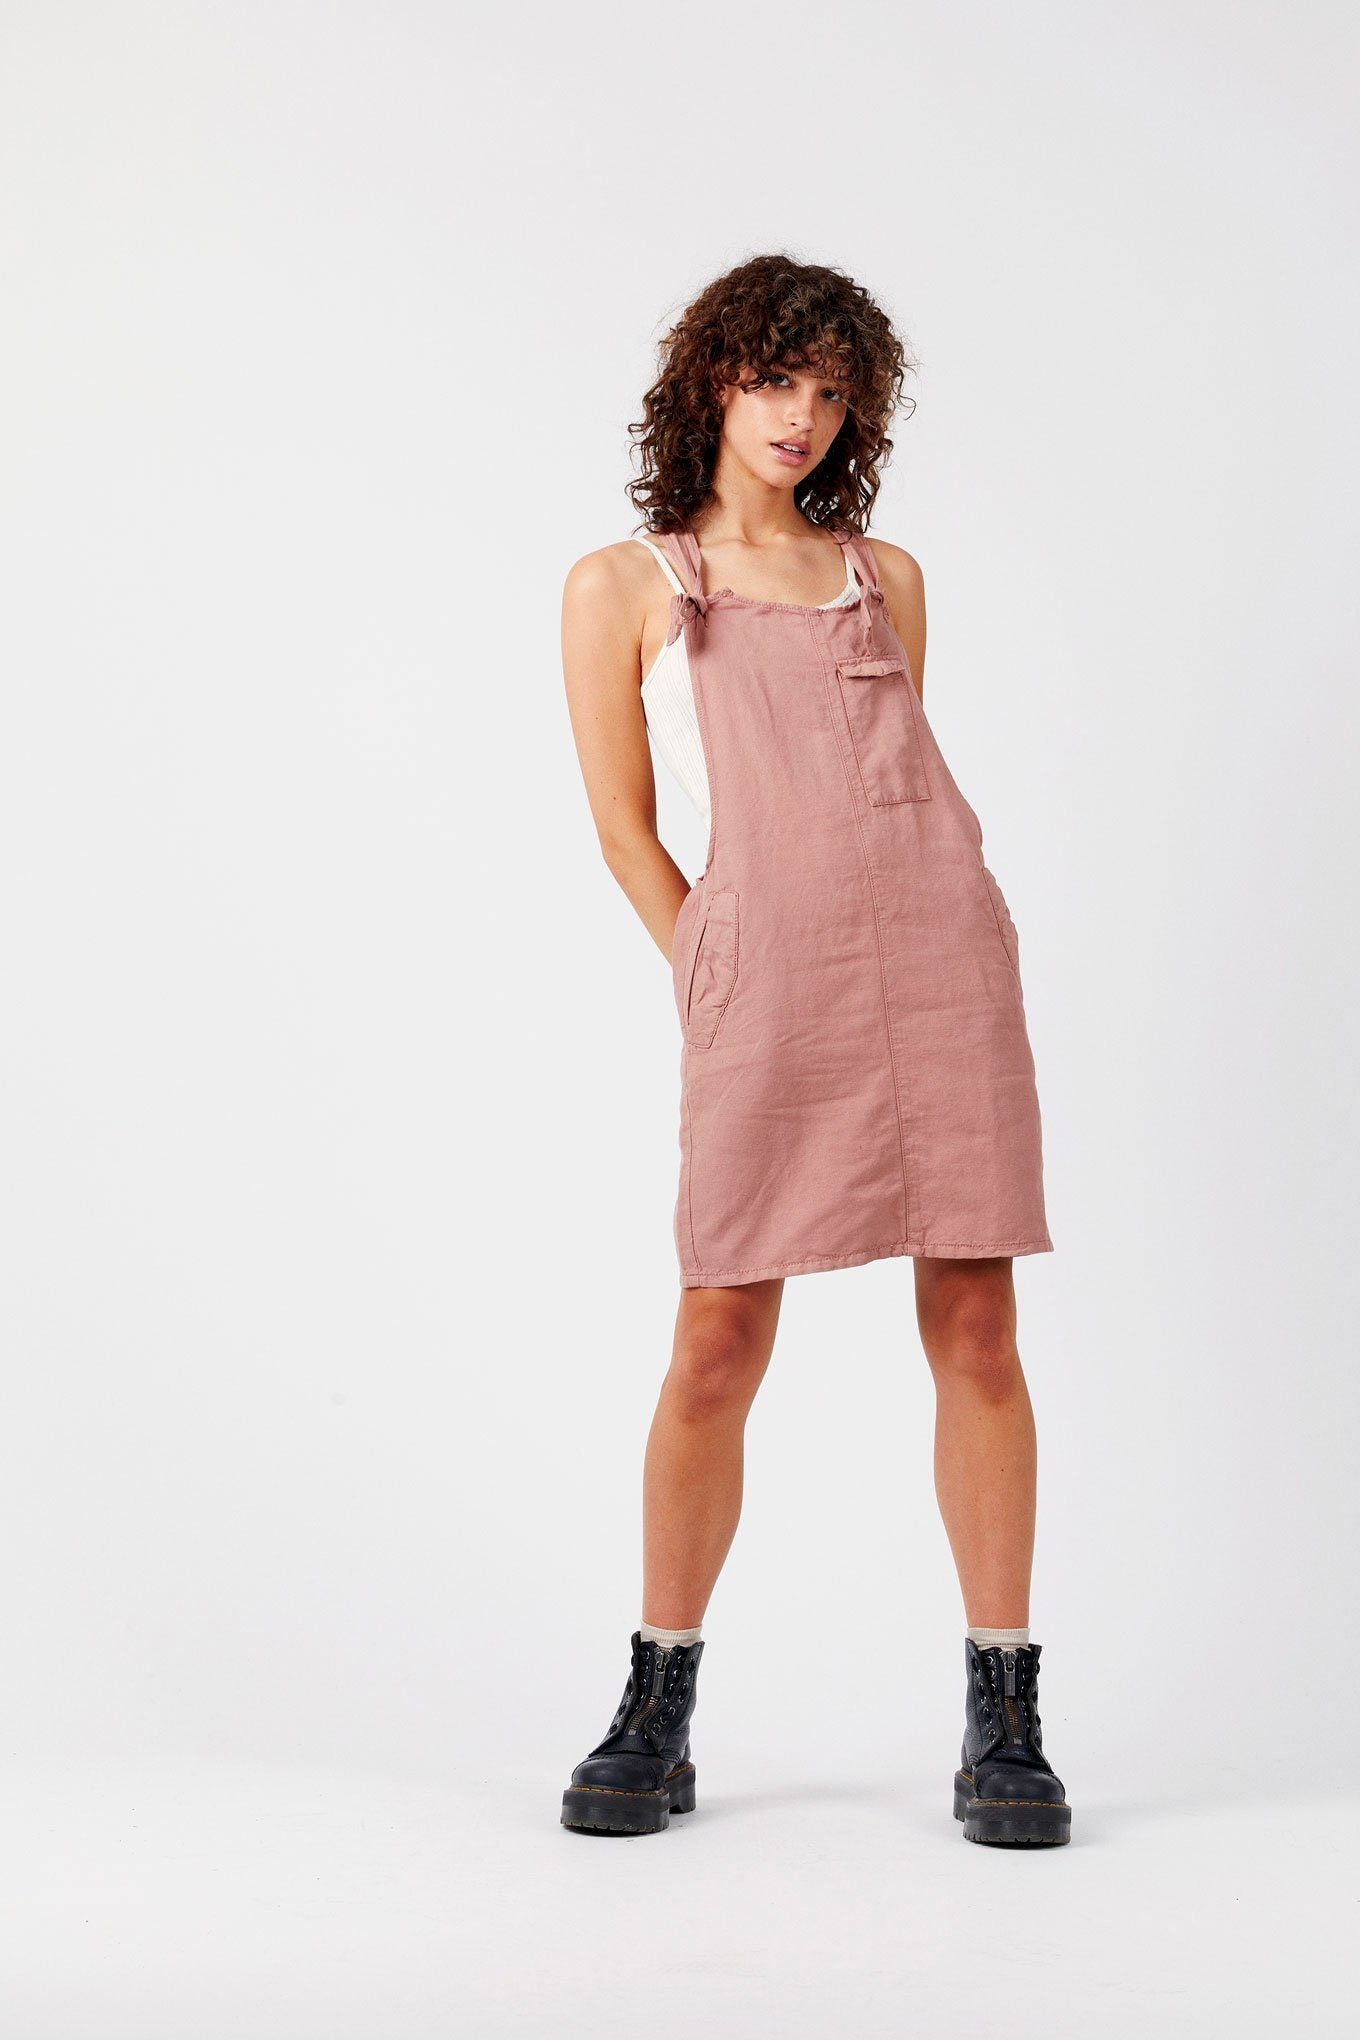 PEGGY Pink - GOTS Organic Cotton Dress by Flax & Loom, SIZE 2 / UK 10 / EUR 38